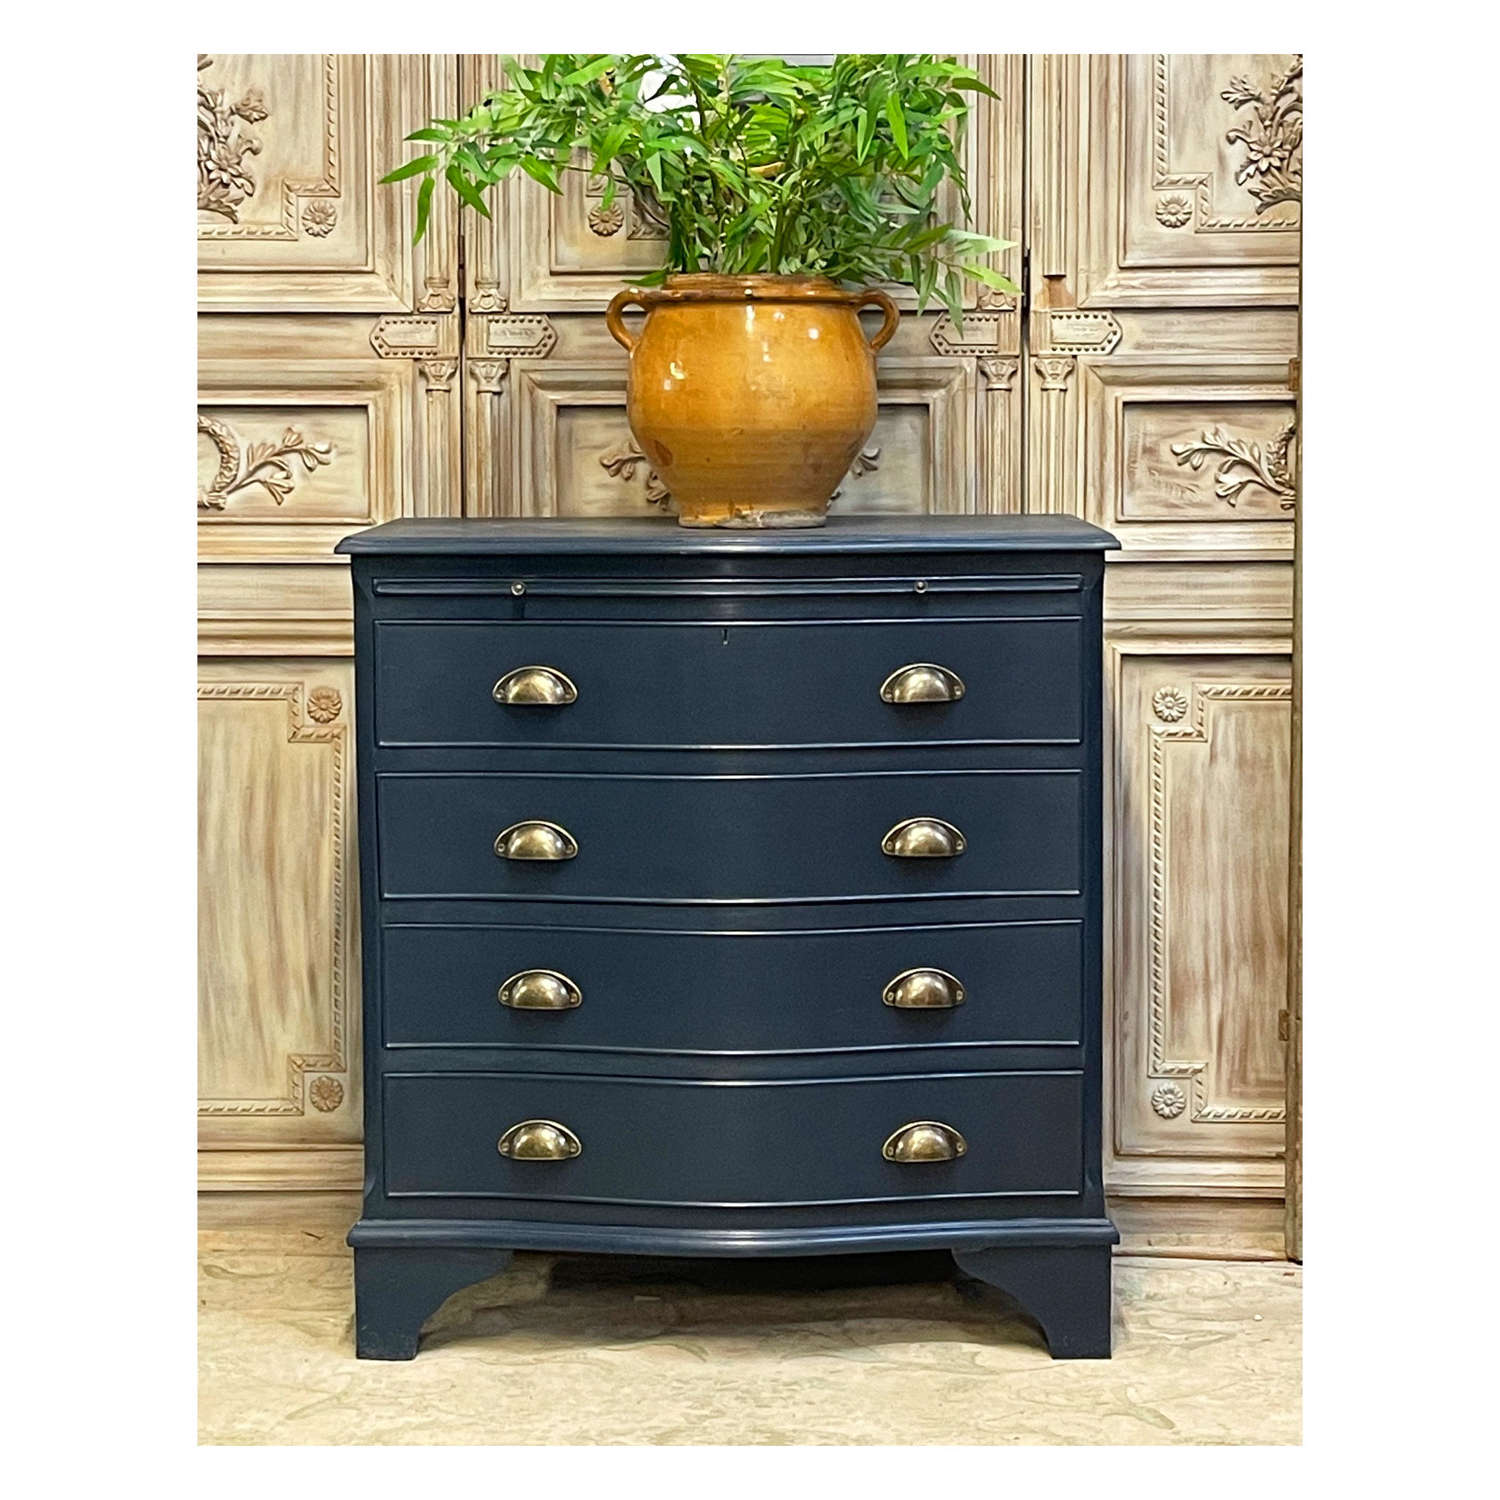 Regency style chest of drawers